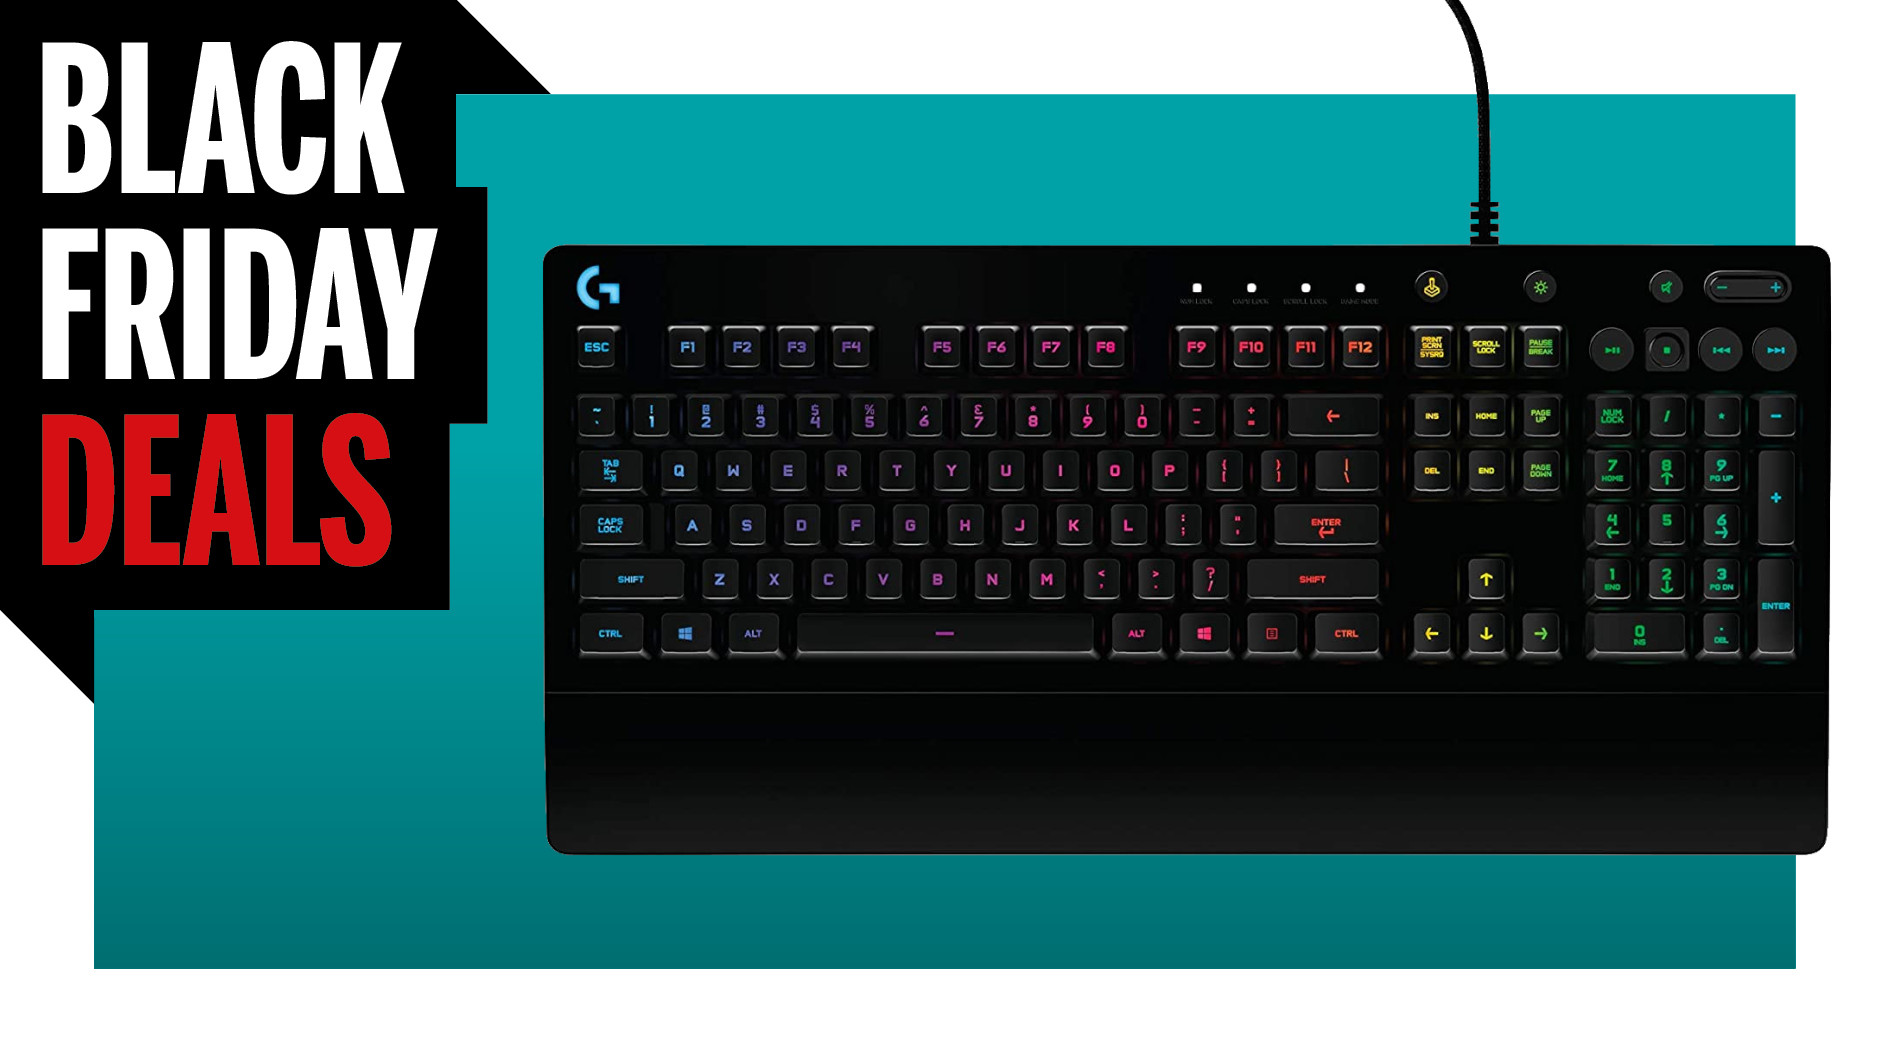  Get the cheap but durable Logitech G213 Prodigy keyboard for only $40 on Amazon 